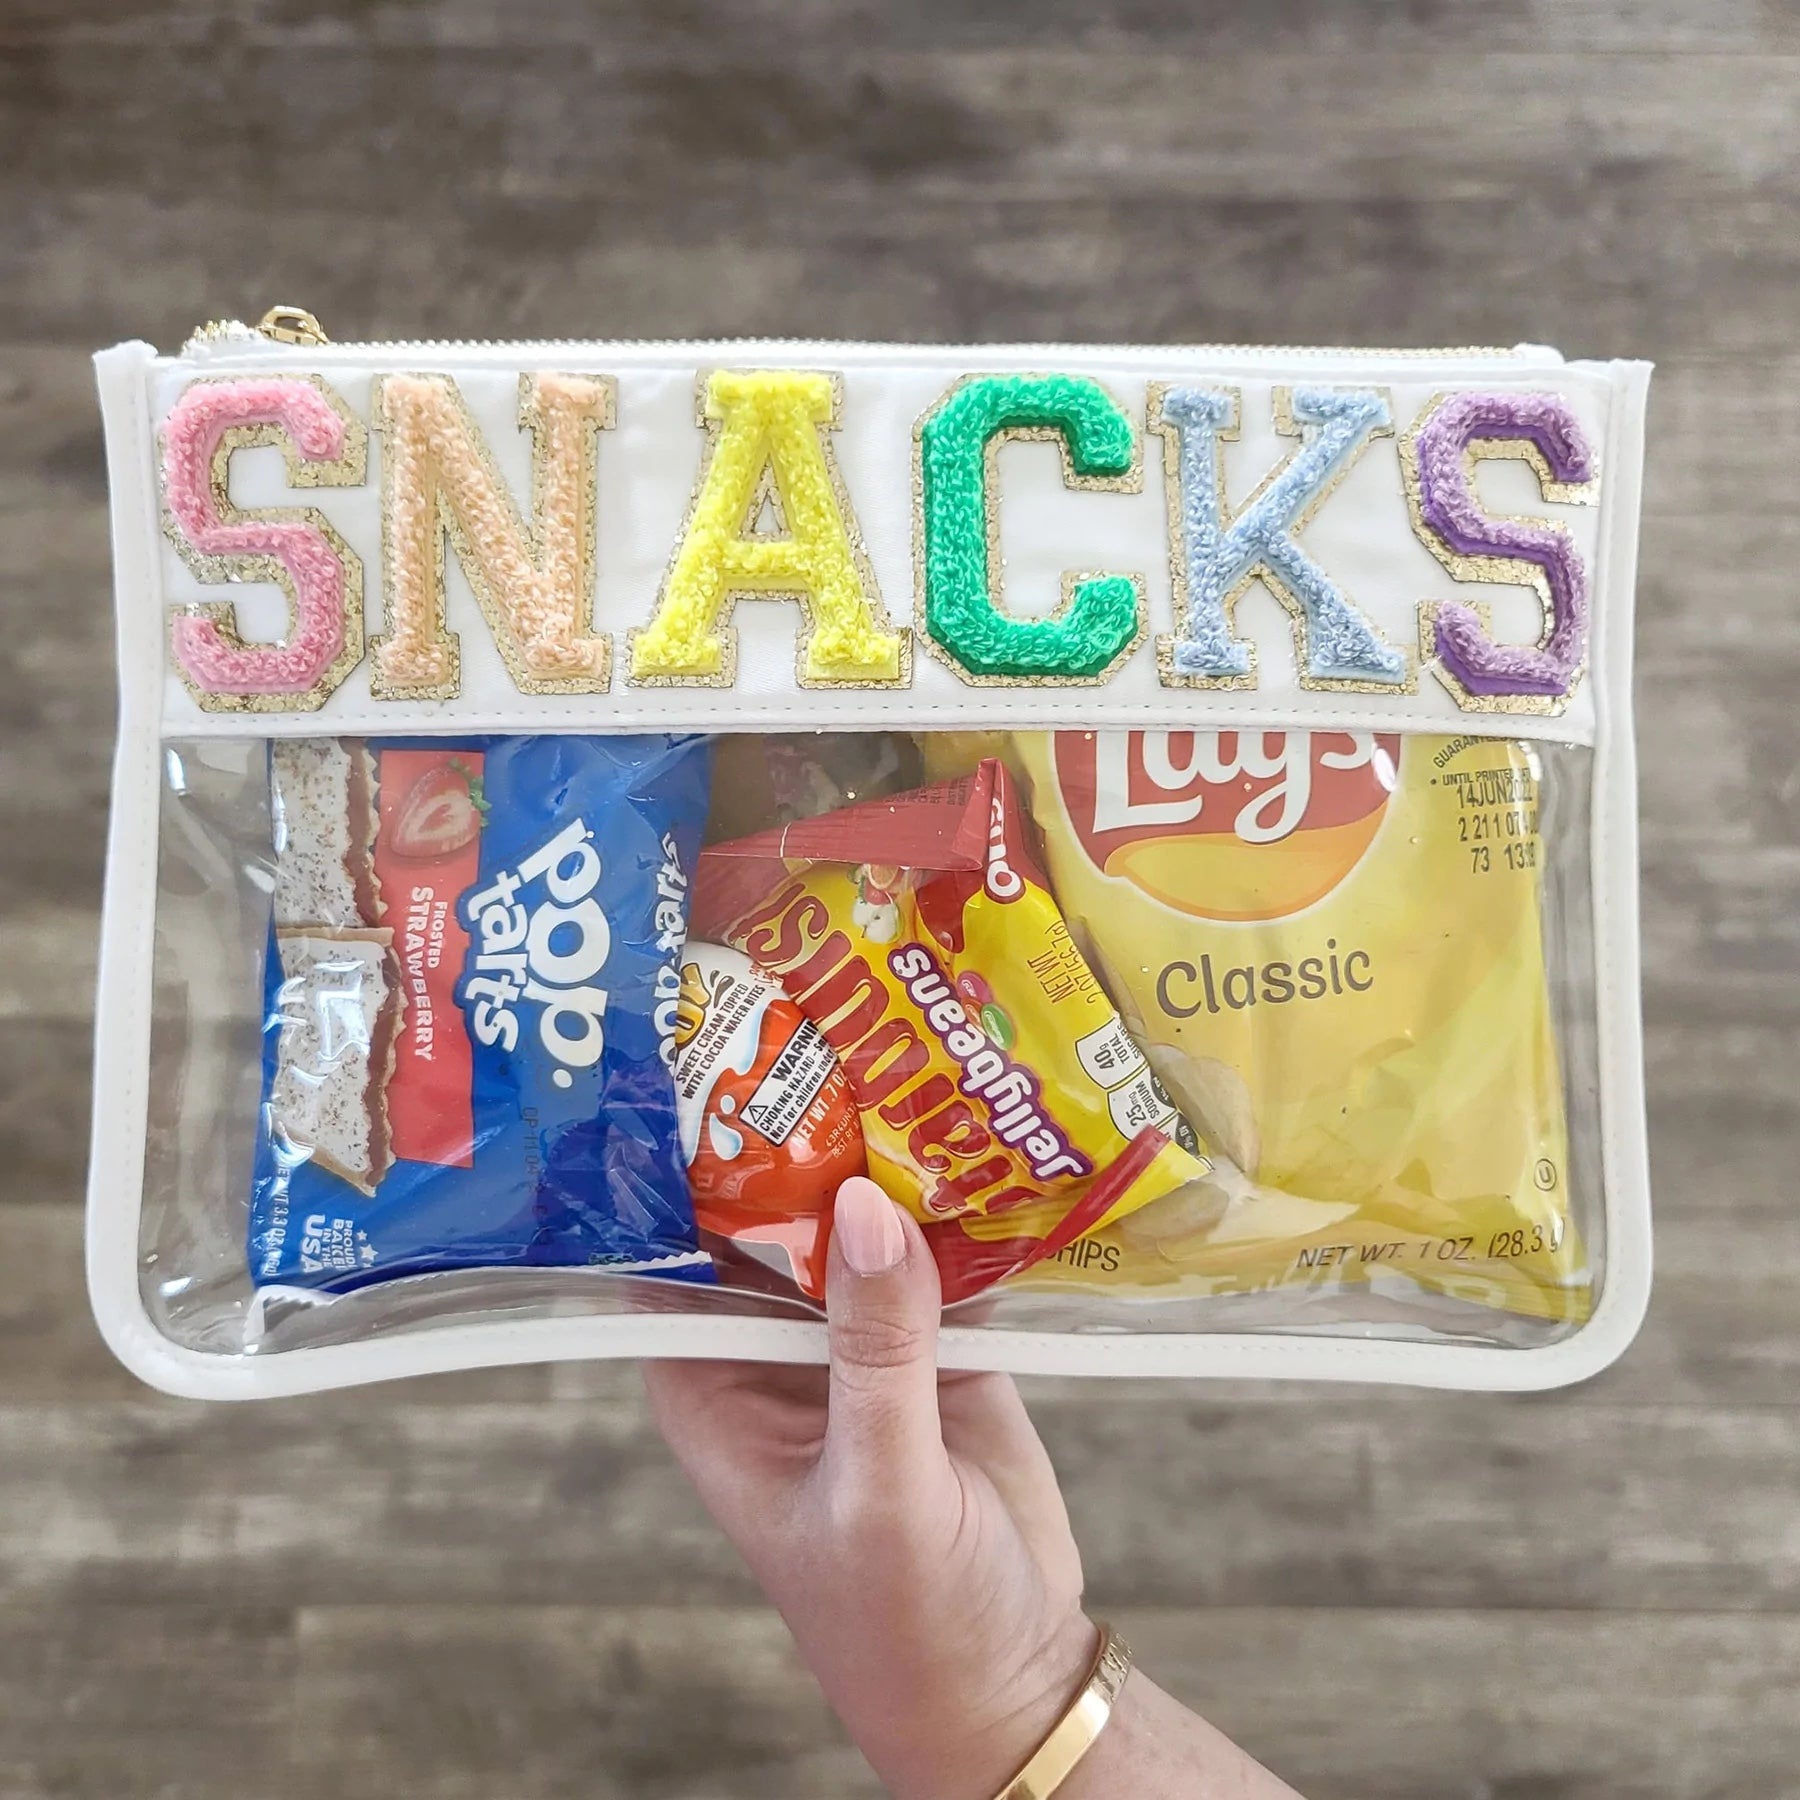 Lone Star Roots "Snacks" - Clear Nylon Bag 